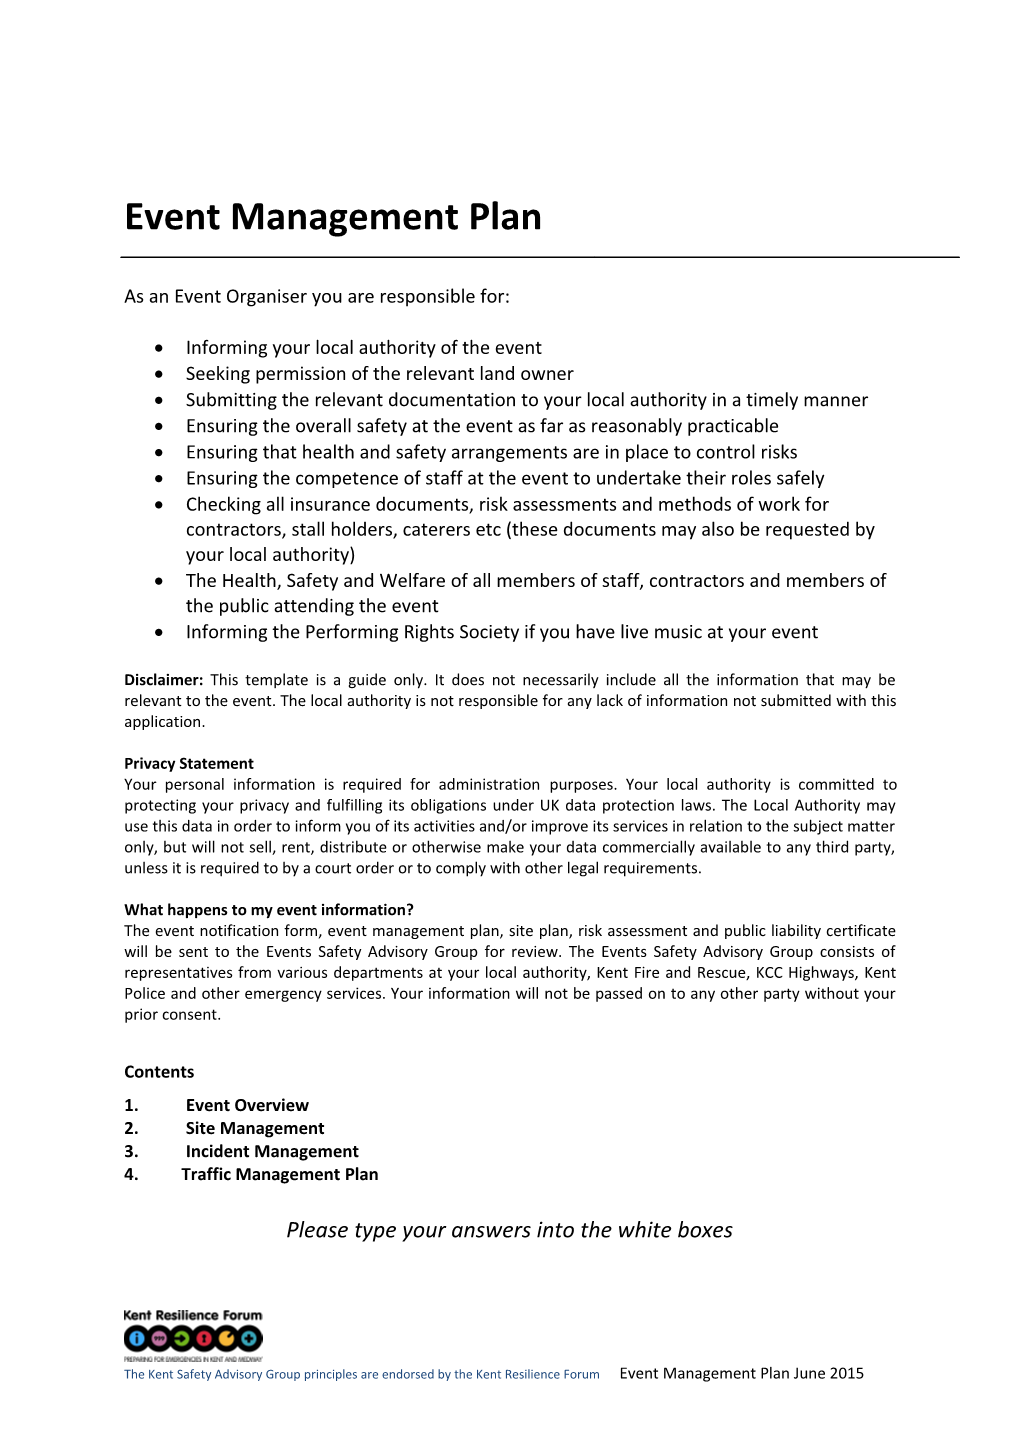 Event Safety Management Plan s1